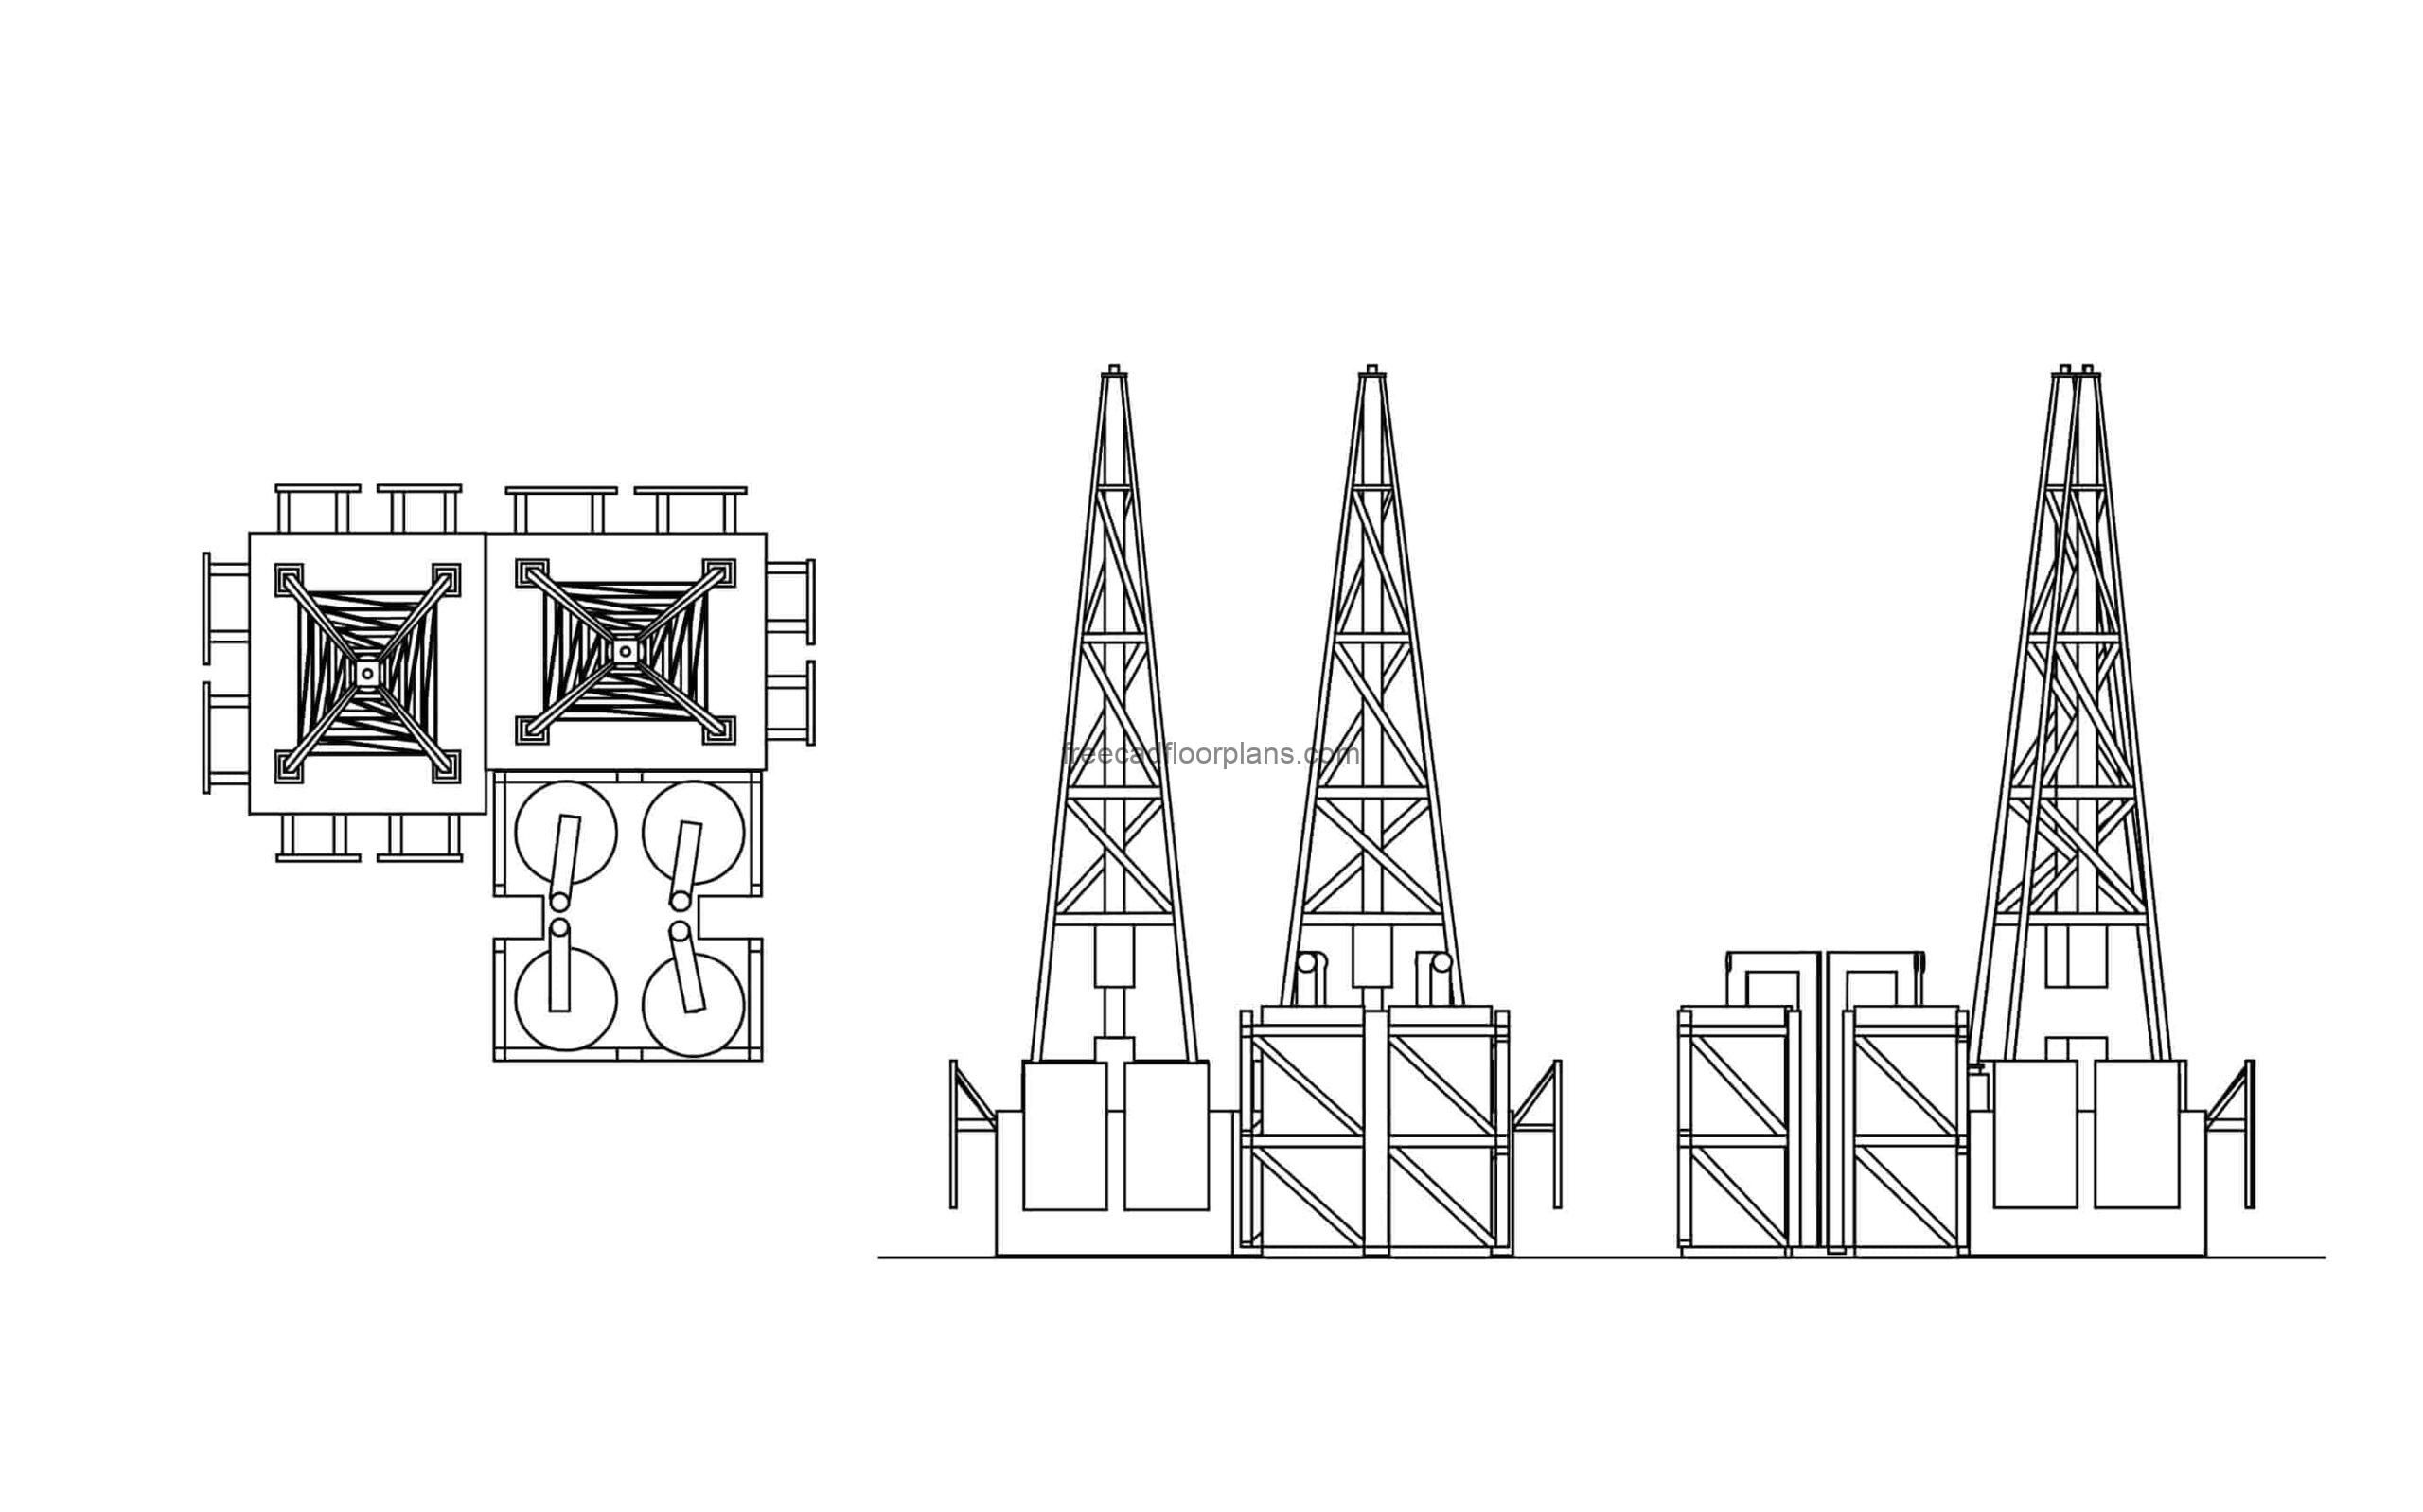 cad block drawing of an oil rig all 2d views plan and elevations, dwg file for free download